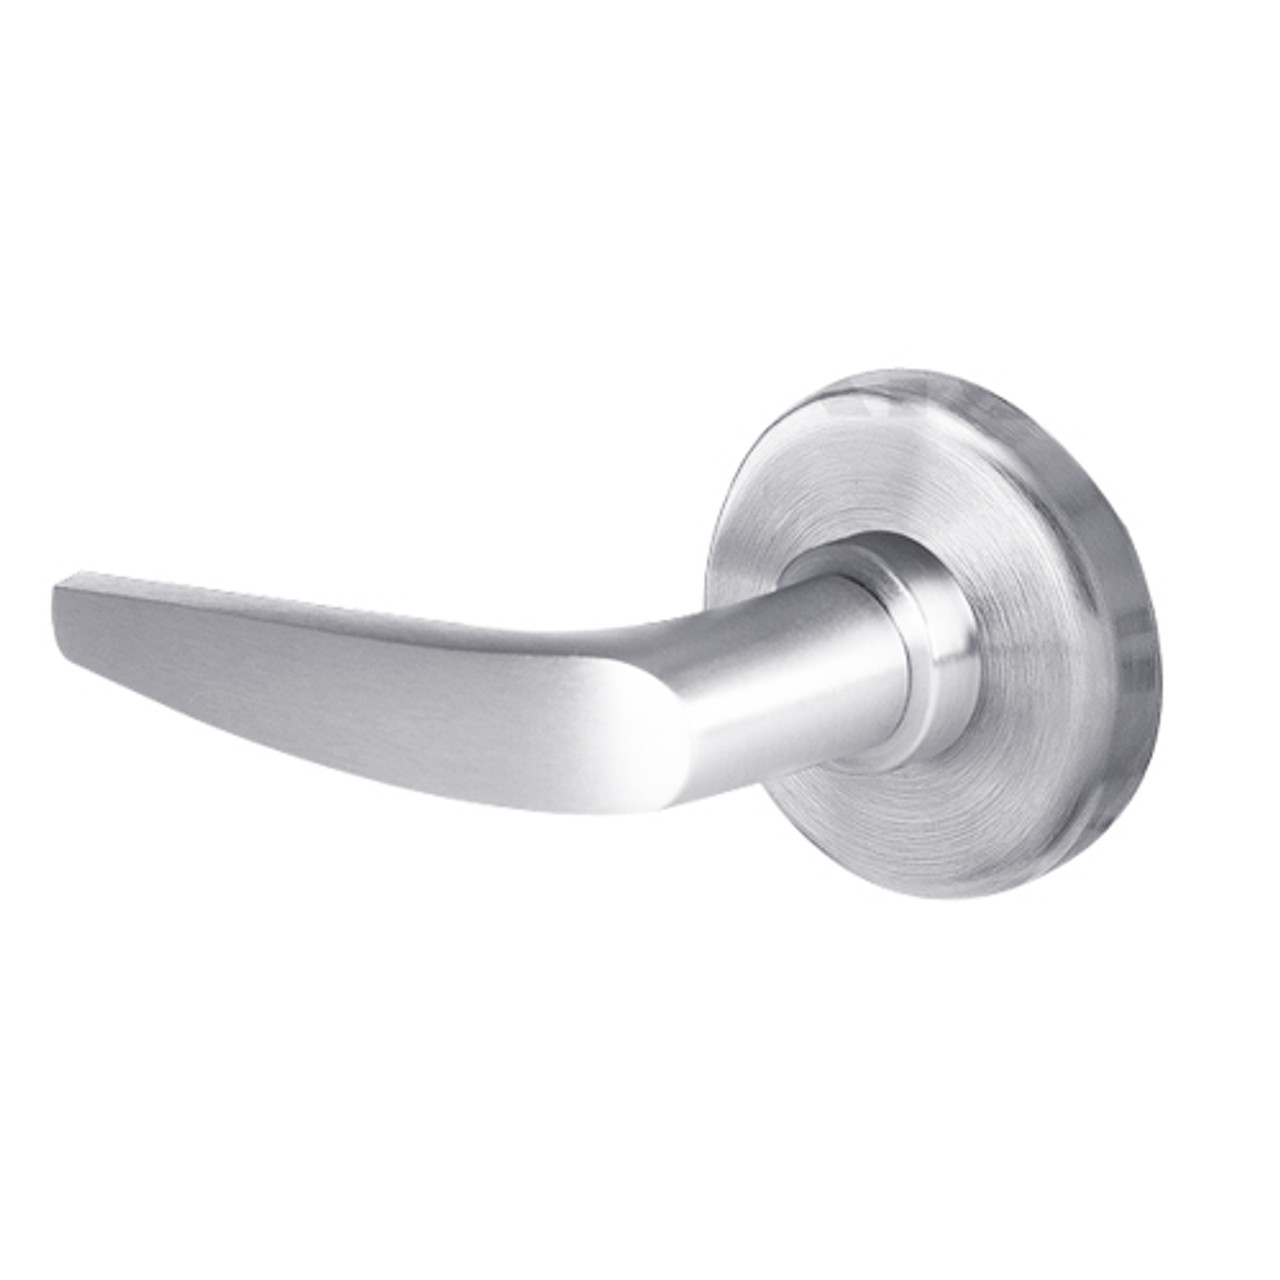 45H0LT16H625 Best 40H Series Privacy Heavy Duty Mortise Lever Lock with Curved with No Return in Bright Chrome